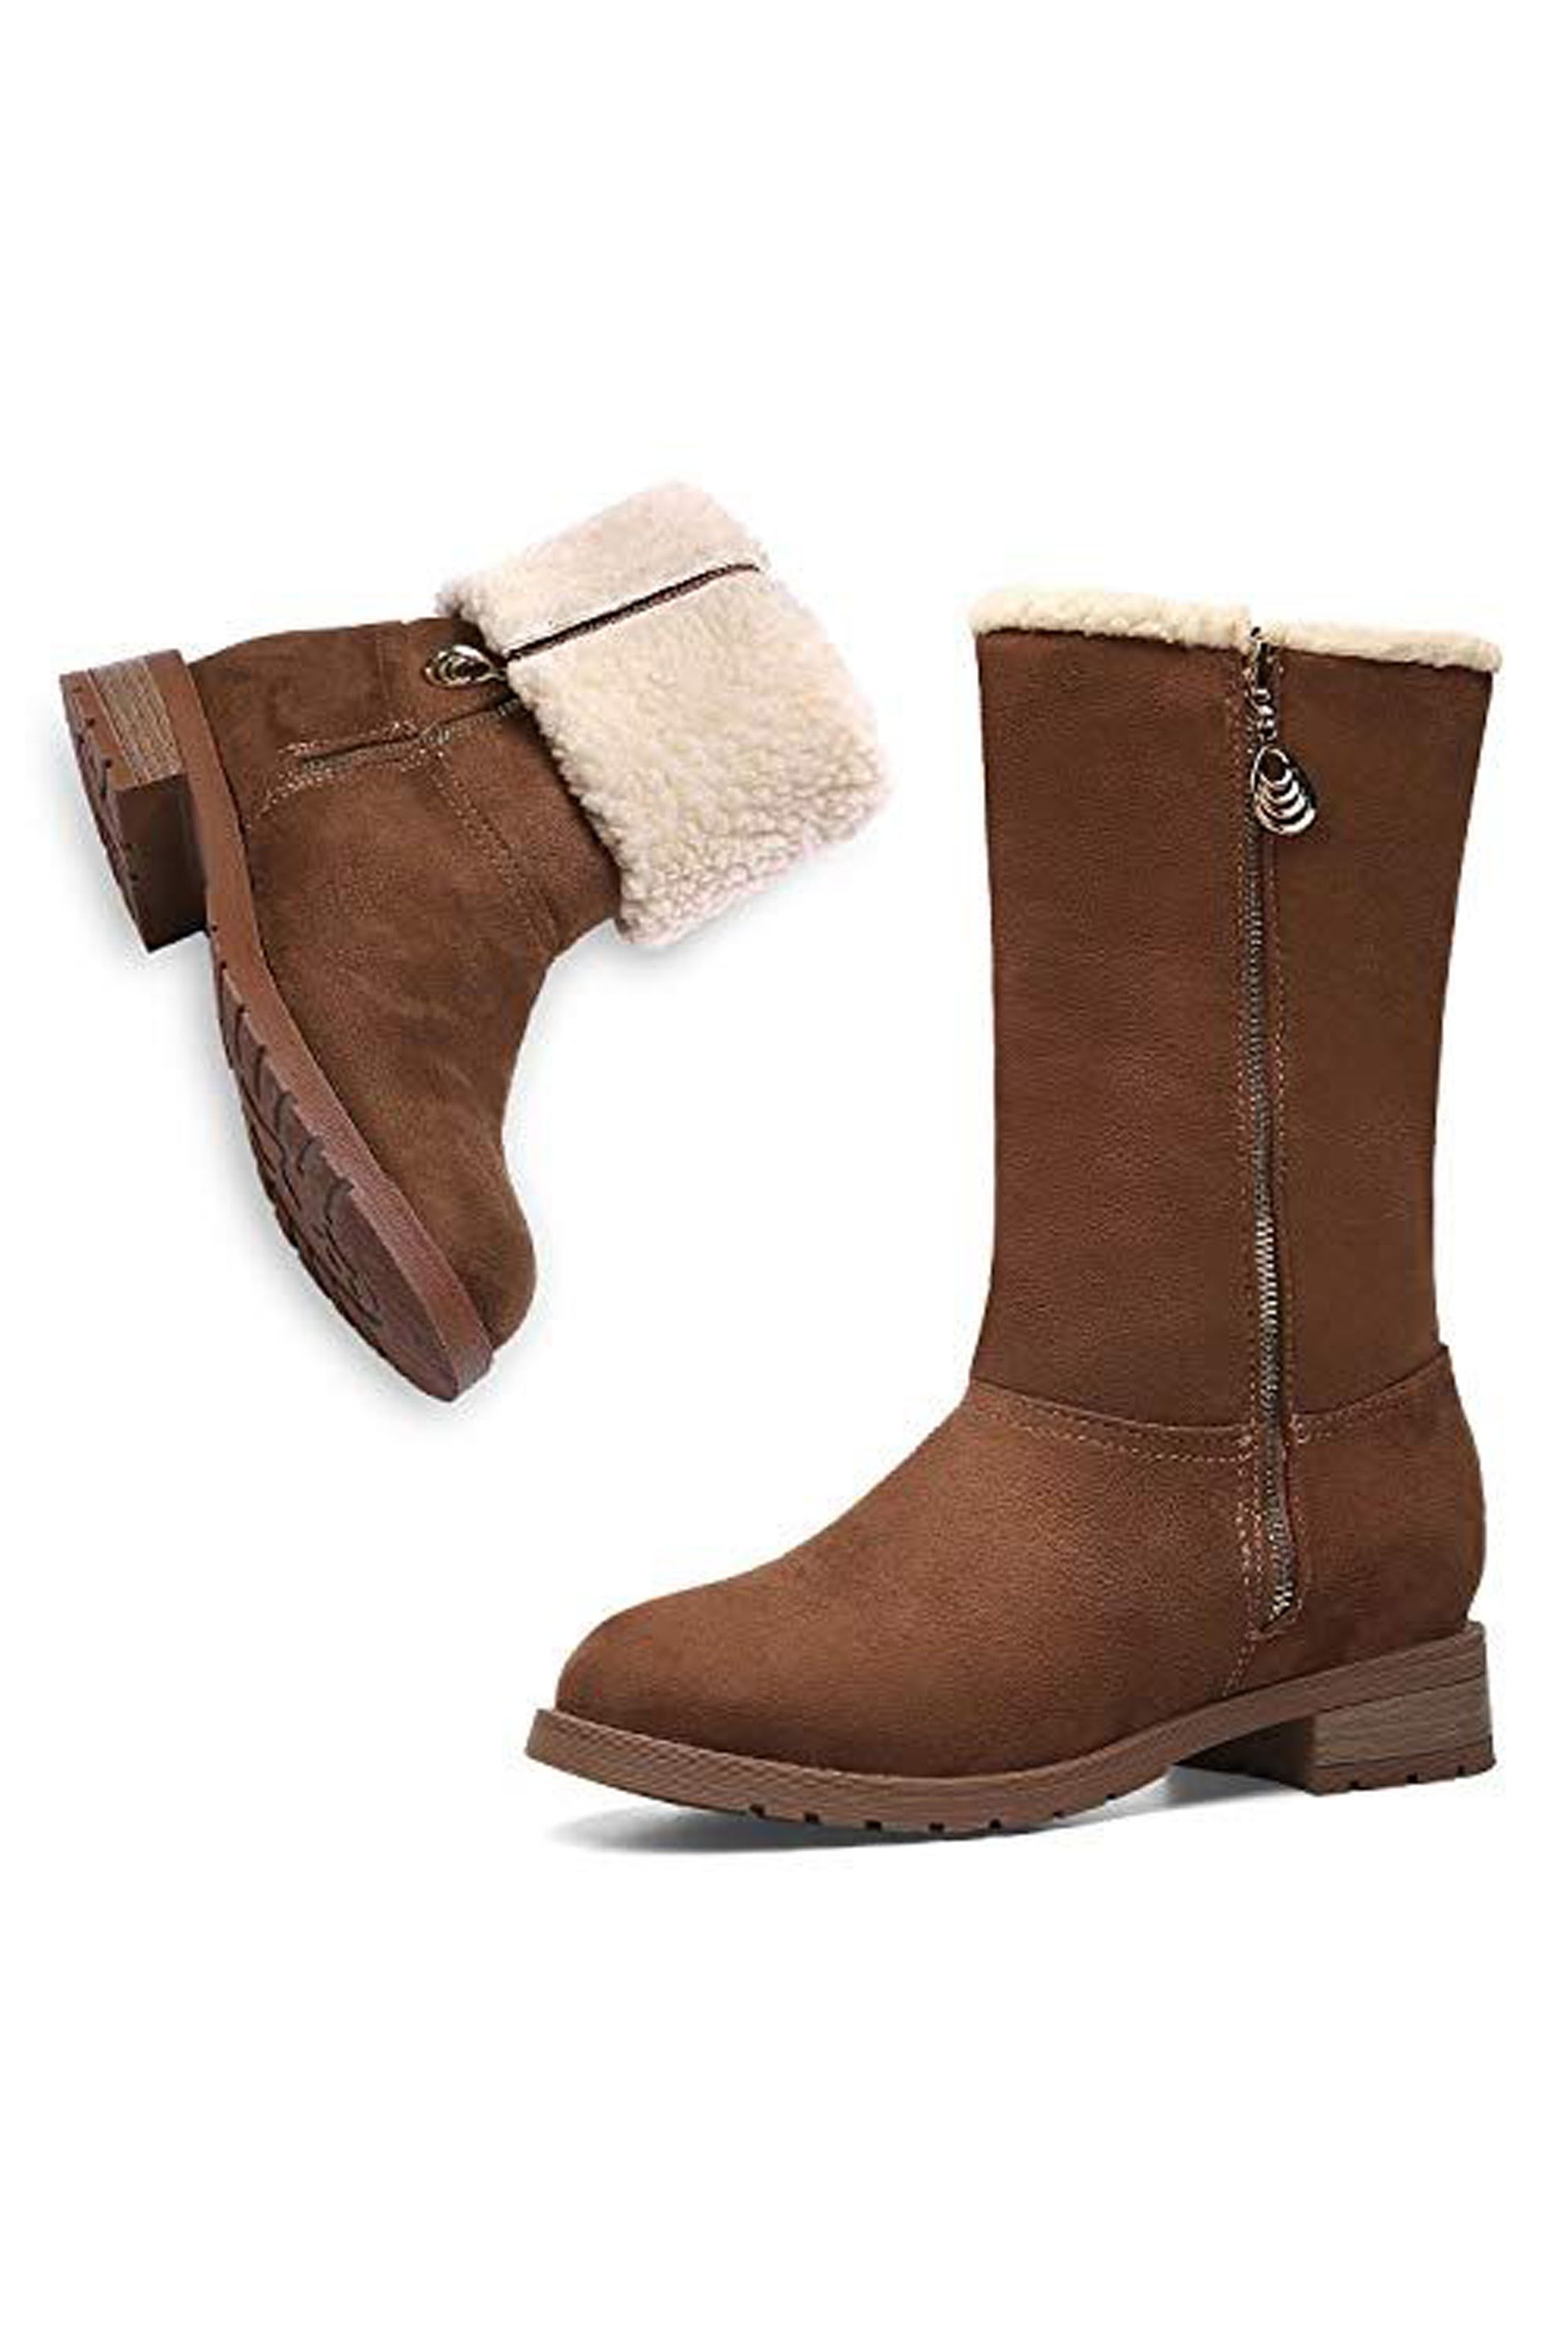 The 18 Best Snow Boots — Cute Winter 